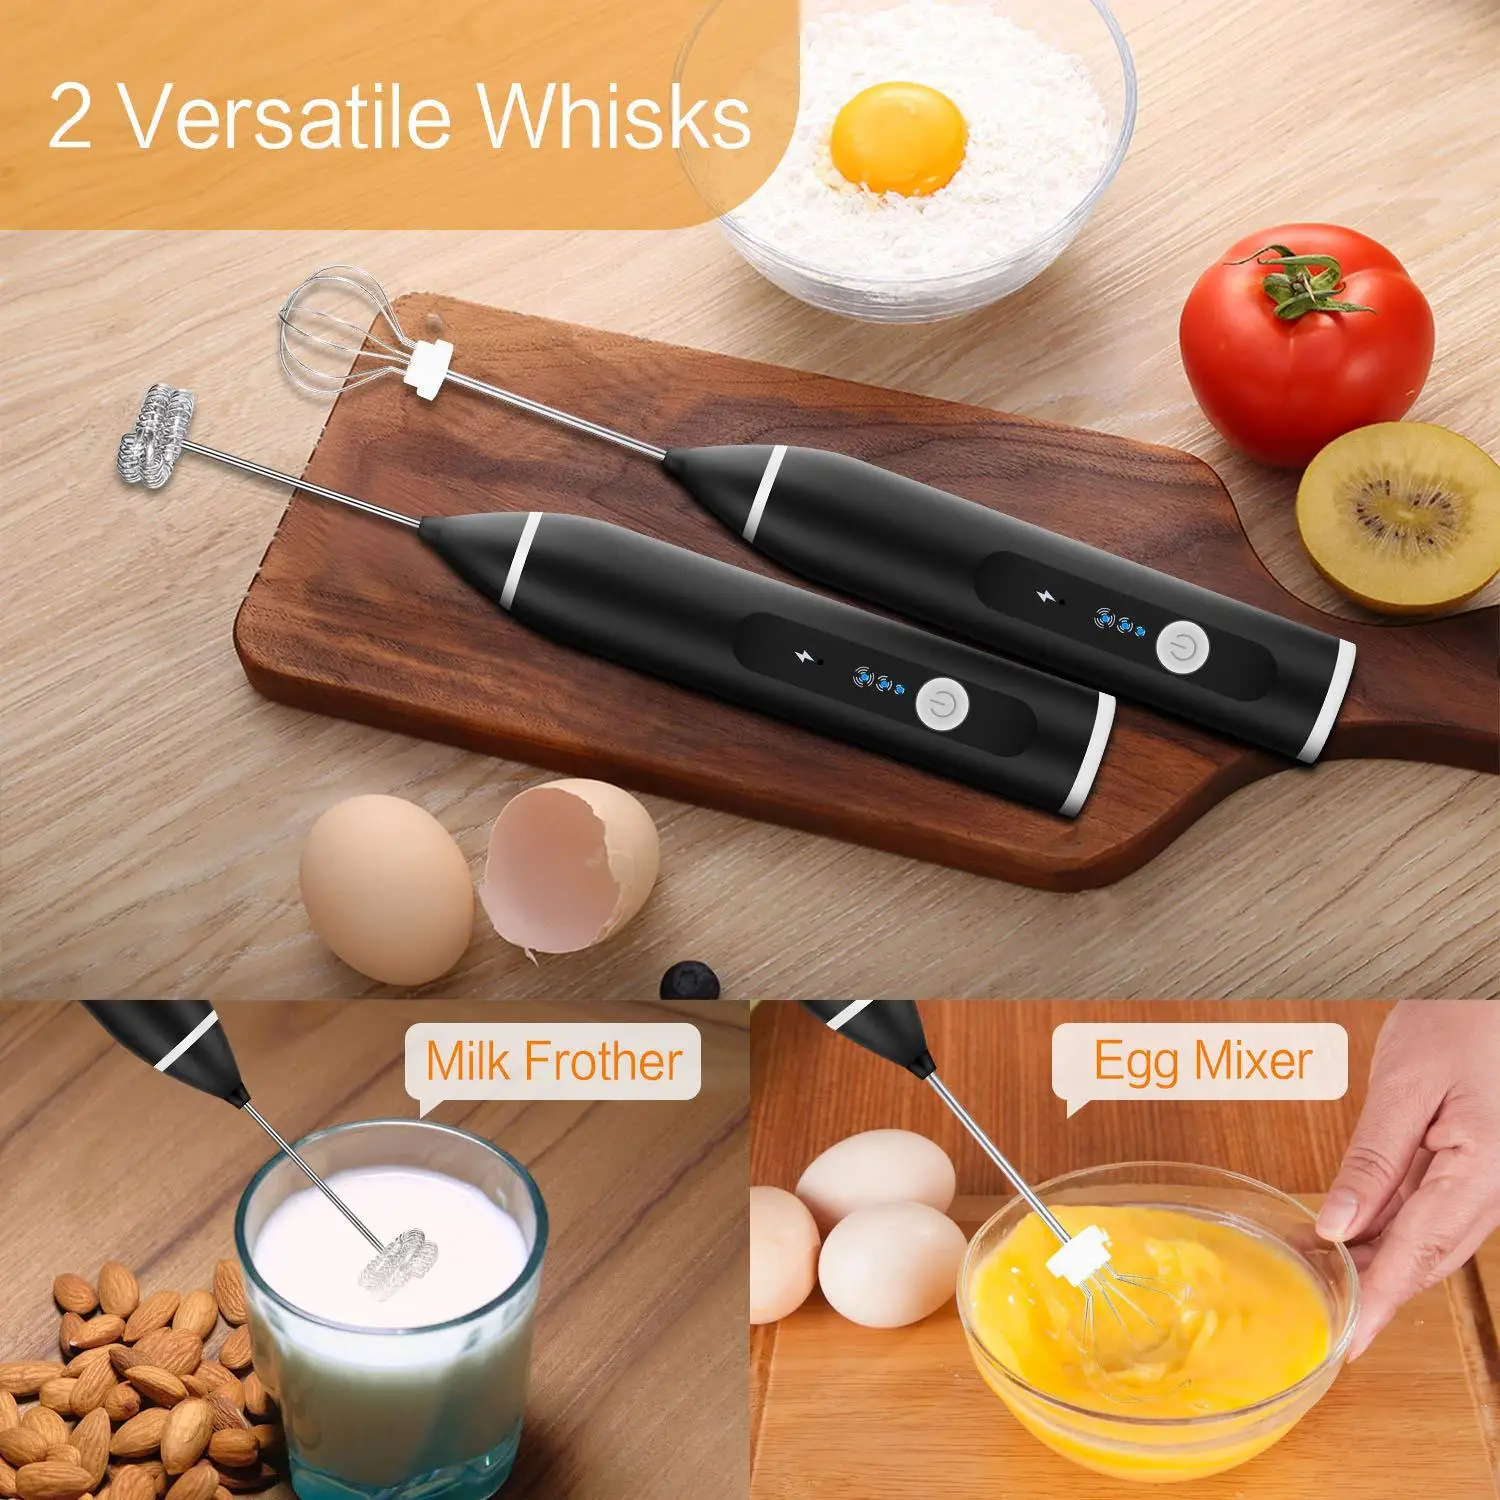 Kbxstart Handheld USB Charge Milk Frother Double Spring Head Milk Foamer Kitchen Mixer Electric Blender For Coffee Egg Beater